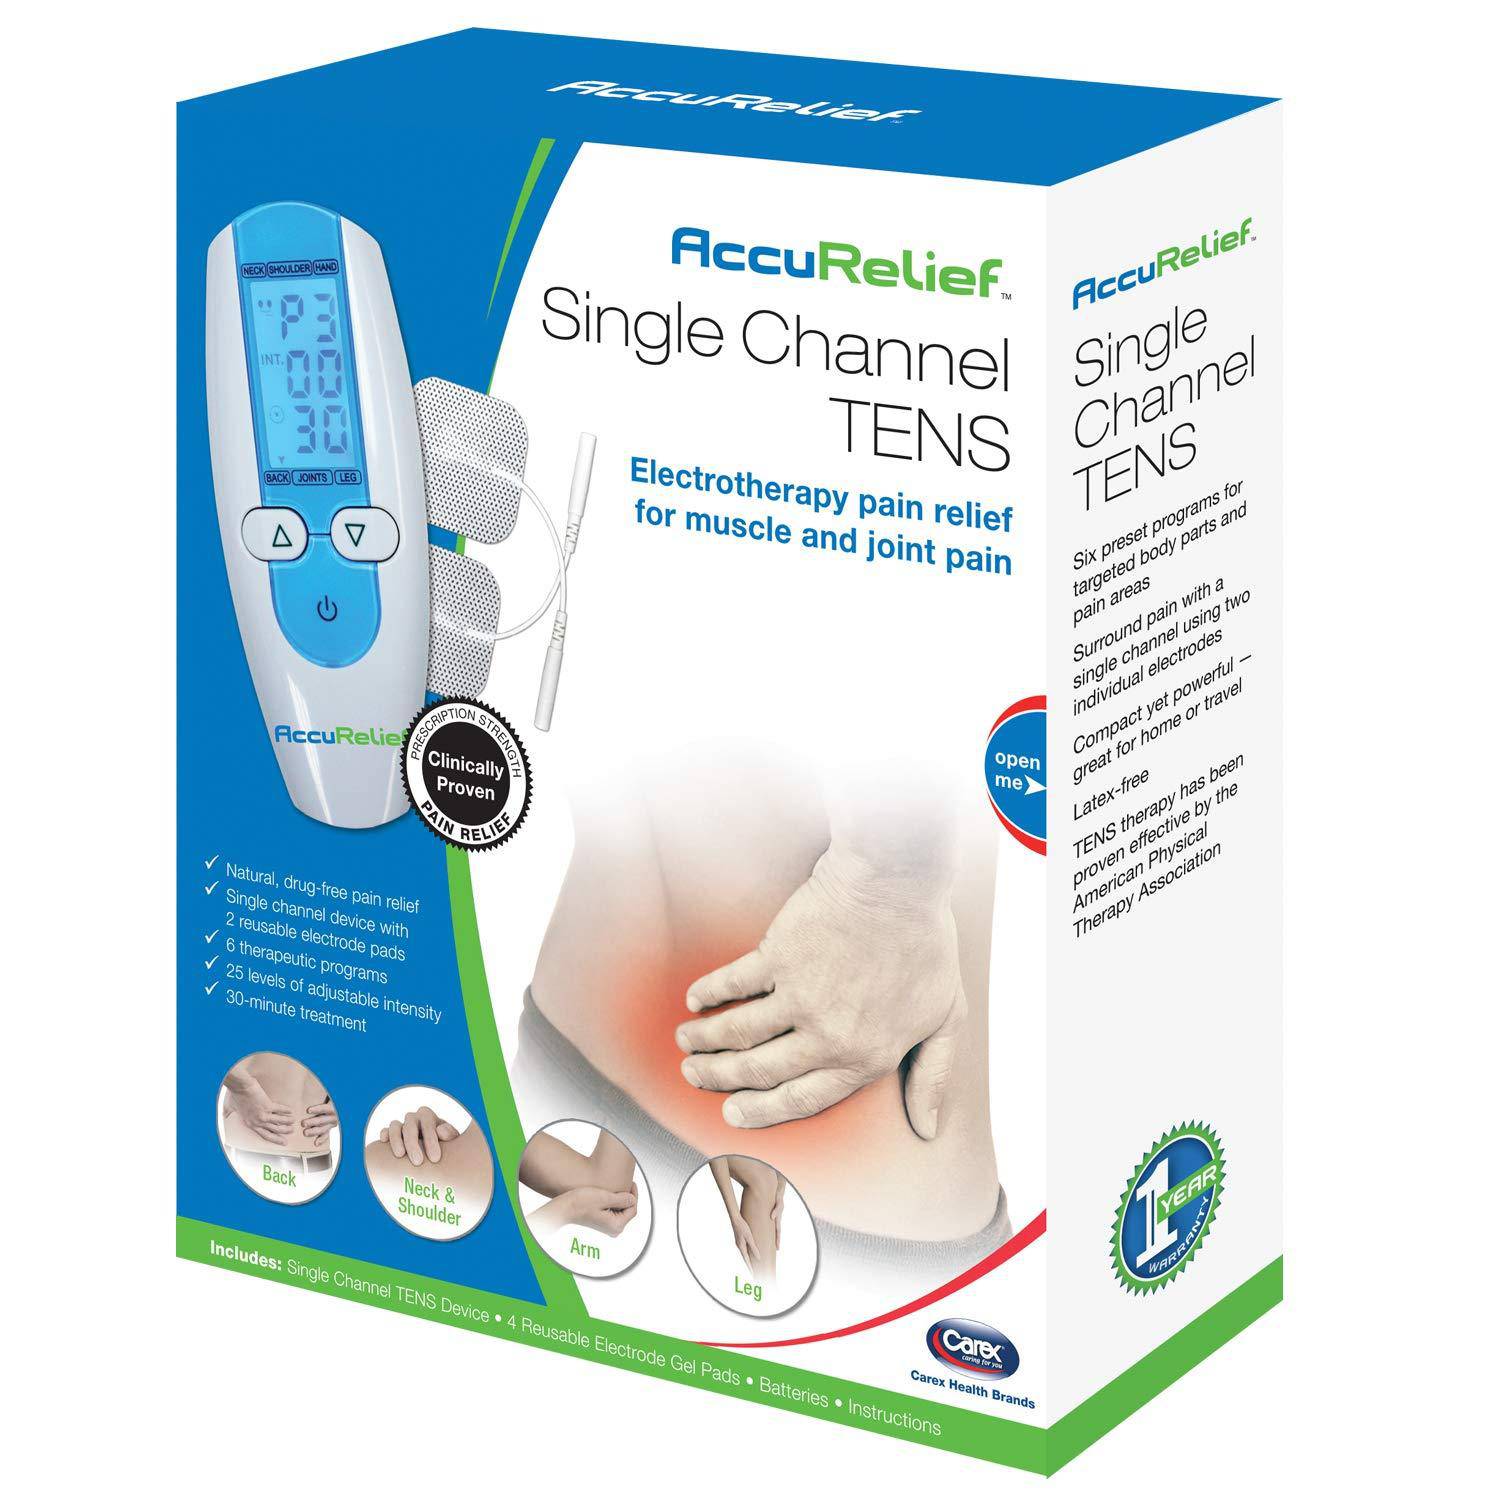 AccuRelief Dual Channel TENS Therapy Pain Relief System